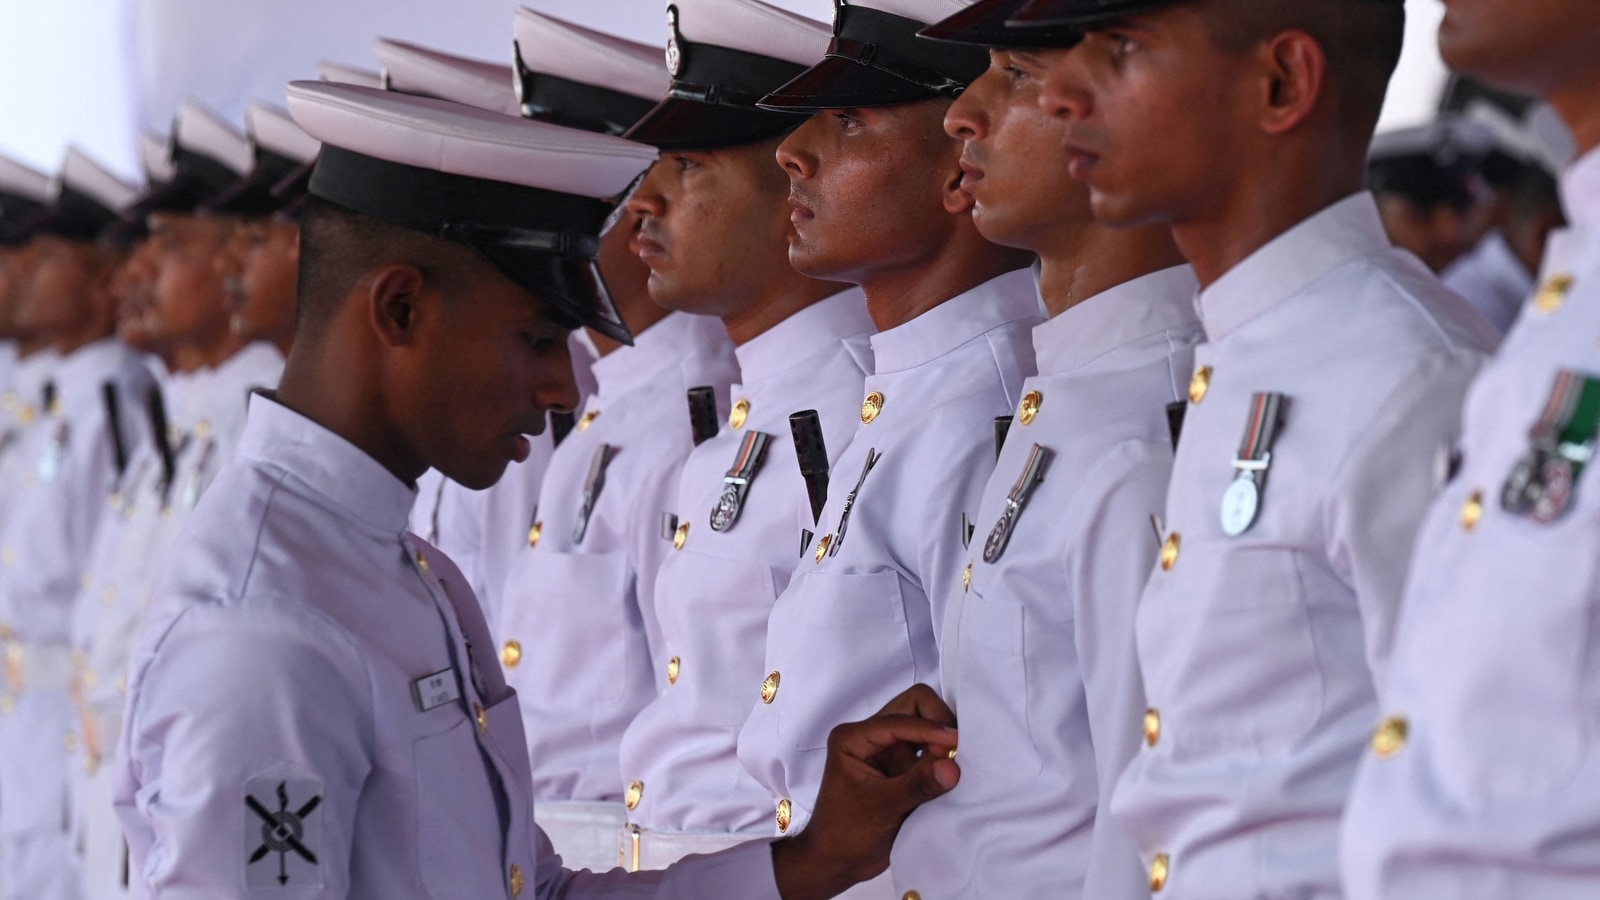 Why Indian Navy now has a camouflage uniform like in Army and Air Force